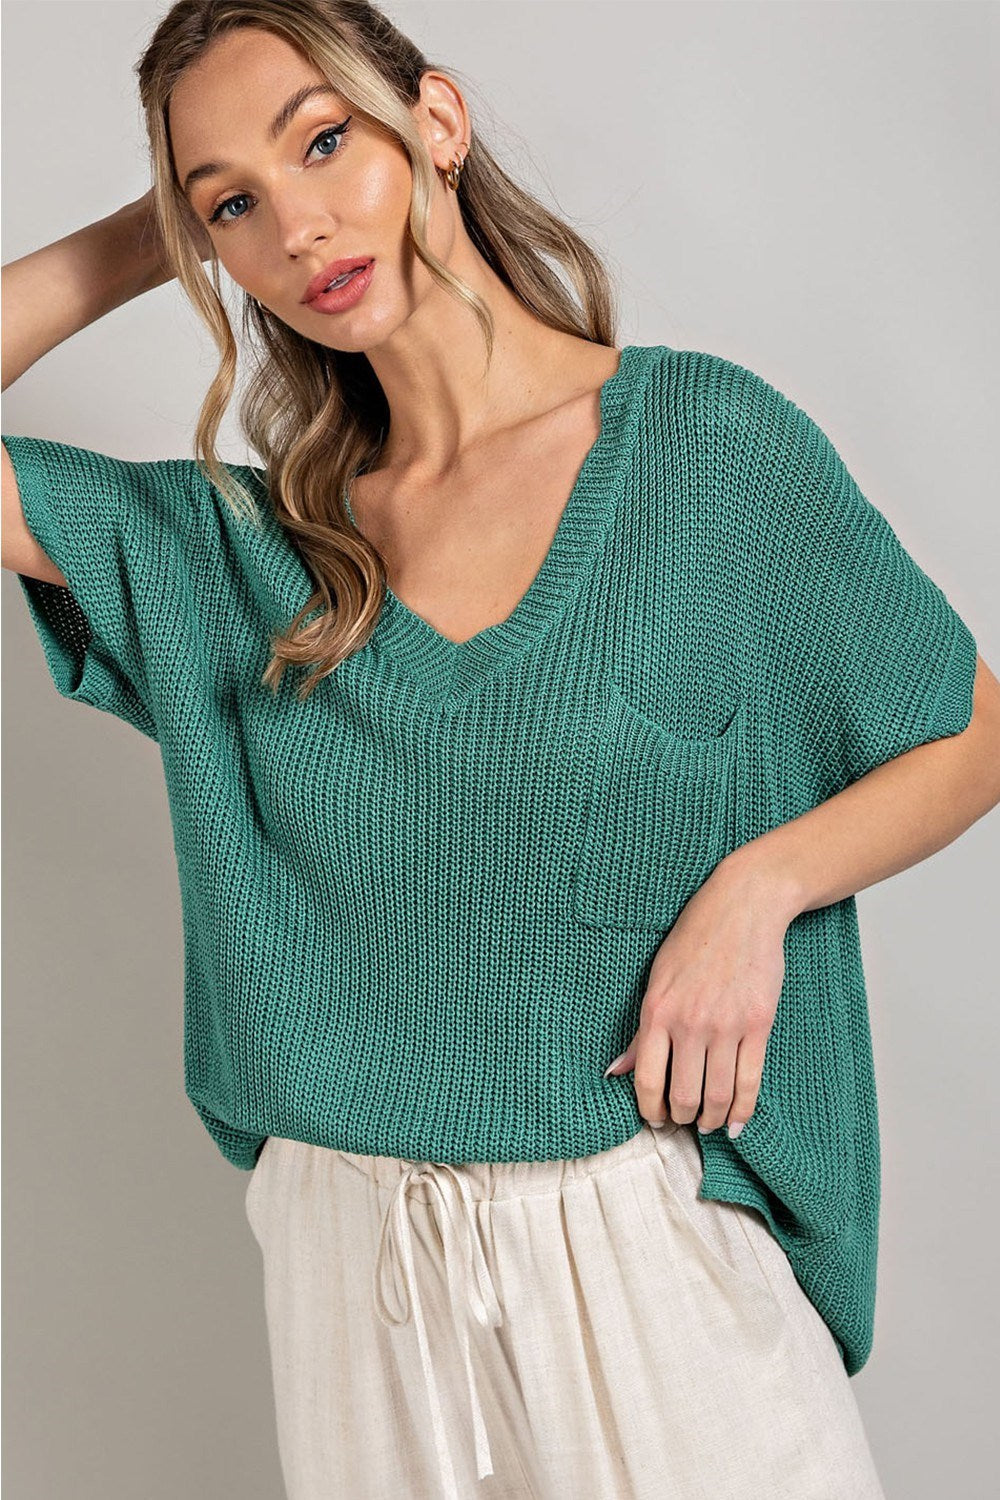 Eesome High Neck Sweater Tank Crop Top by Eesome - Coco Tan